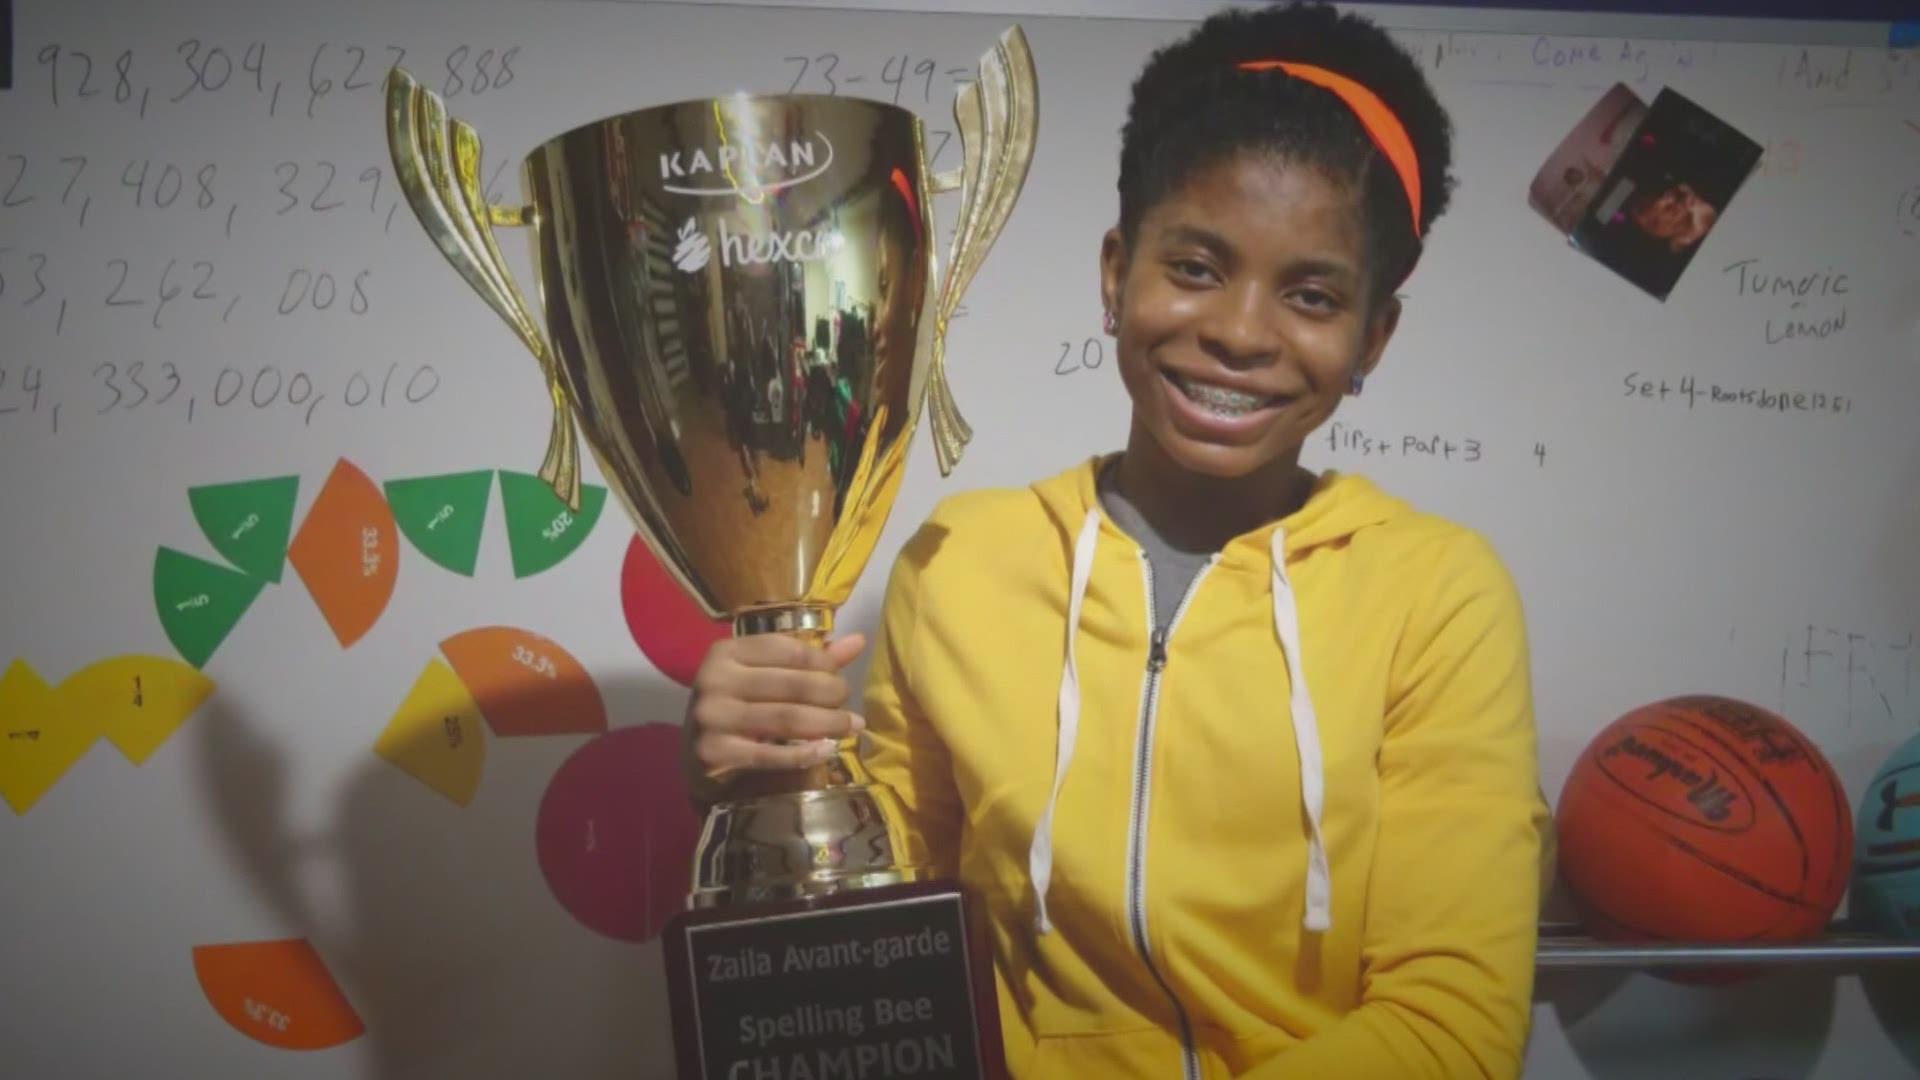 Zaila is the first African American winner and only the second Black champion in the bee's nearly 100-year history.